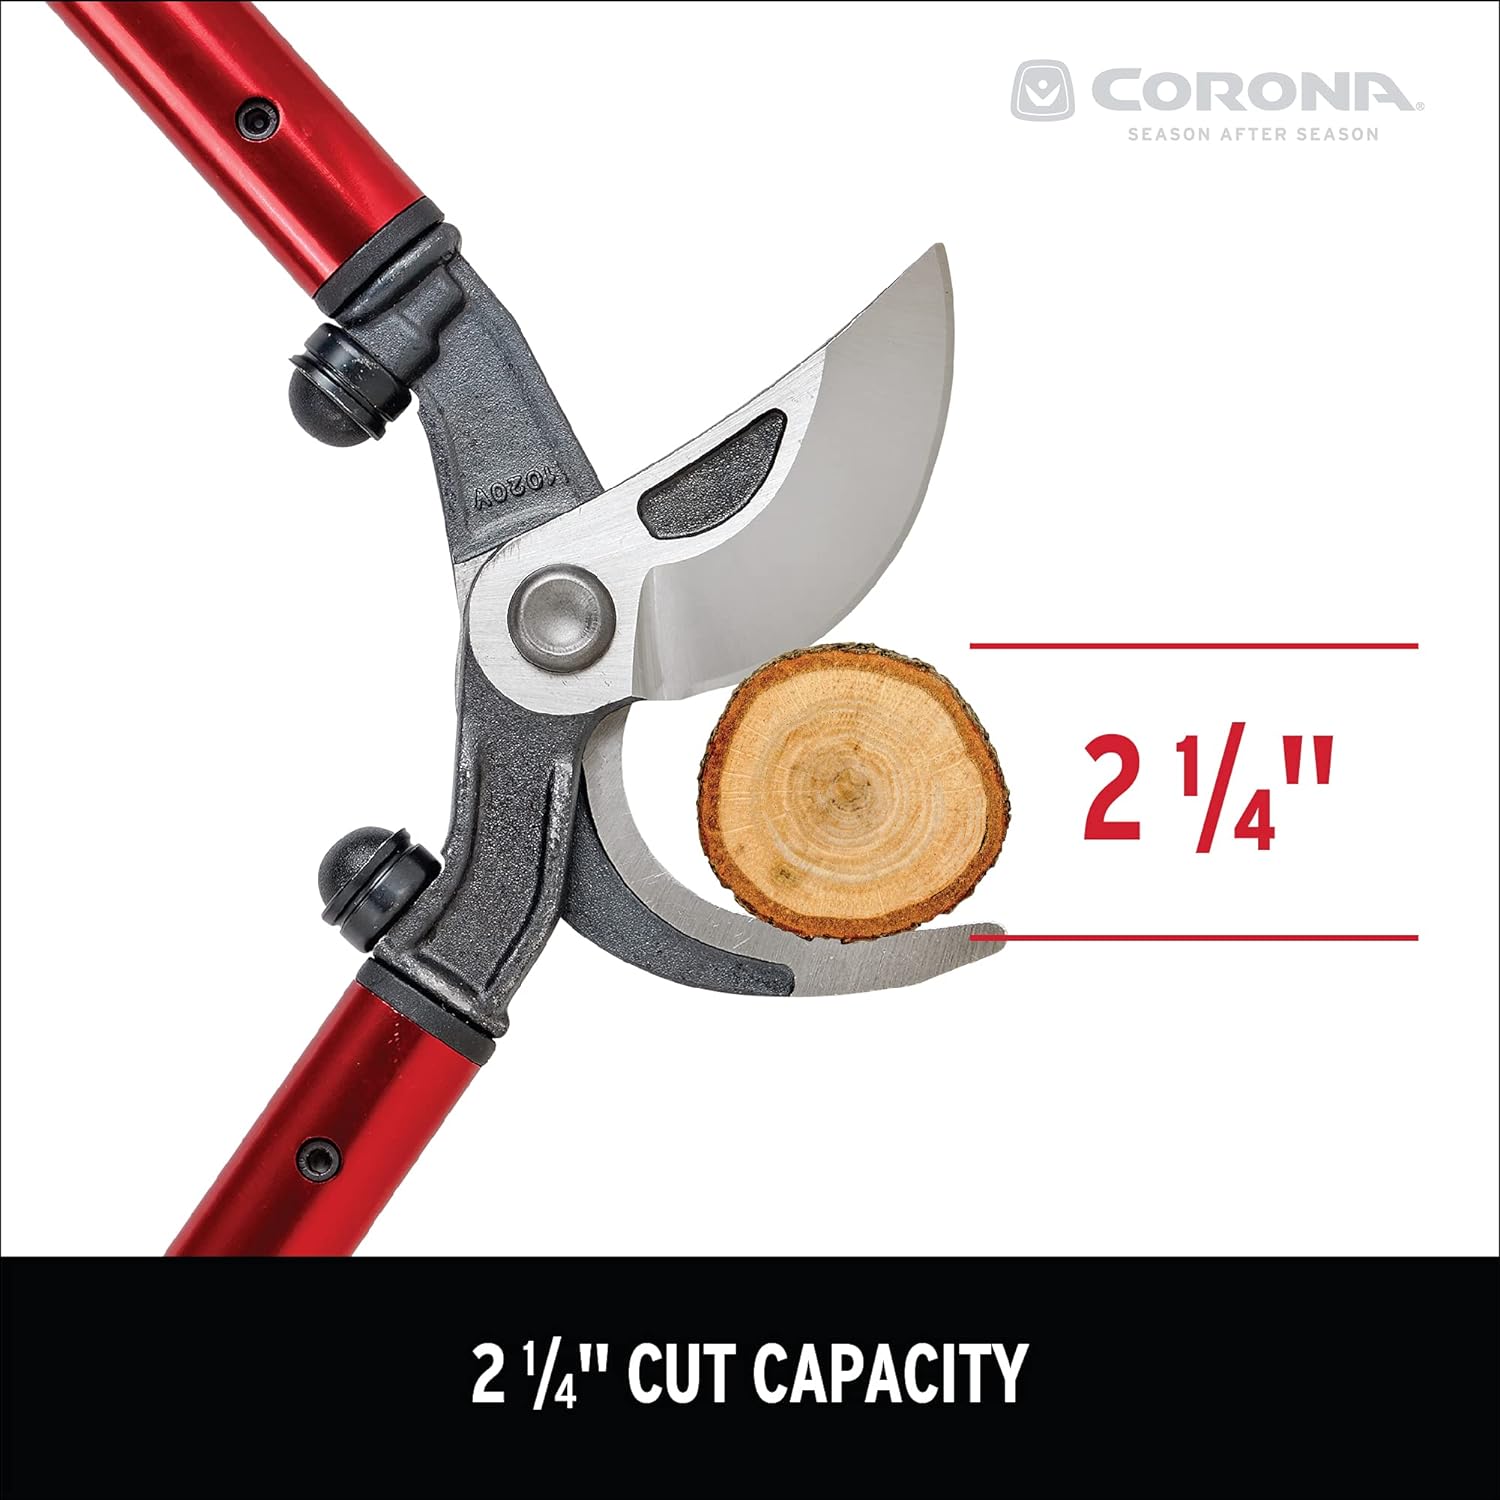 Corona Tools | 26-inch Branch Cutter MAXFORGED Orchard Loppers | Tree Trimmer Cuts Branches up to 2 ¼-inches in Diameter | AL 8442 Red